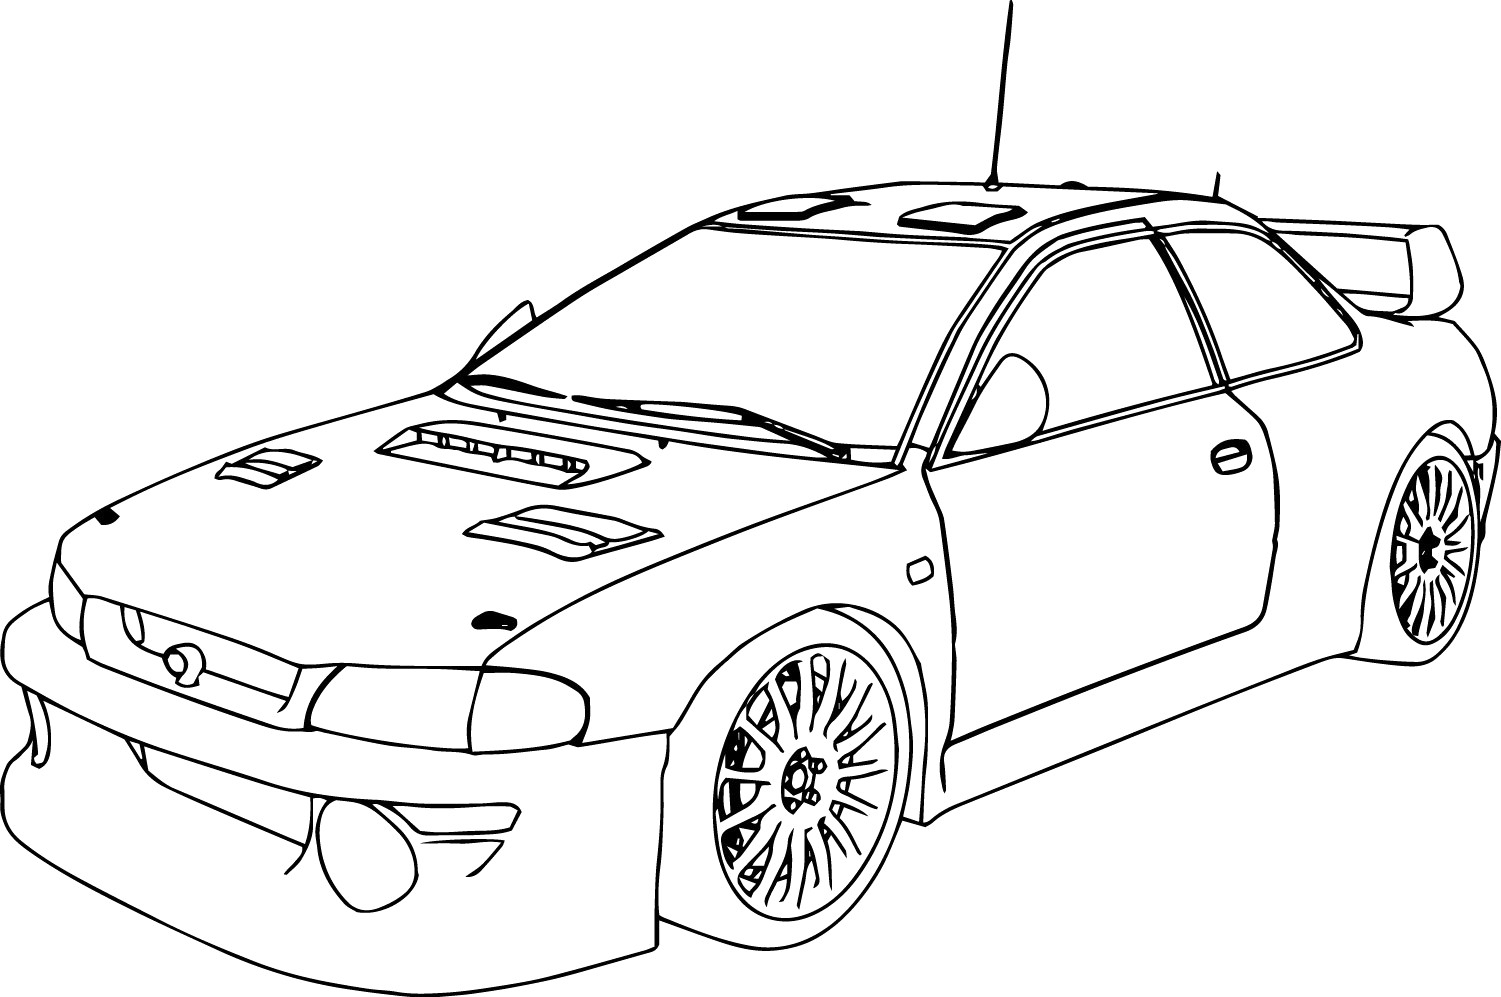 Coloring Page Of A Race Car Modest Coloring Page Race Car Lego Juniors Pages